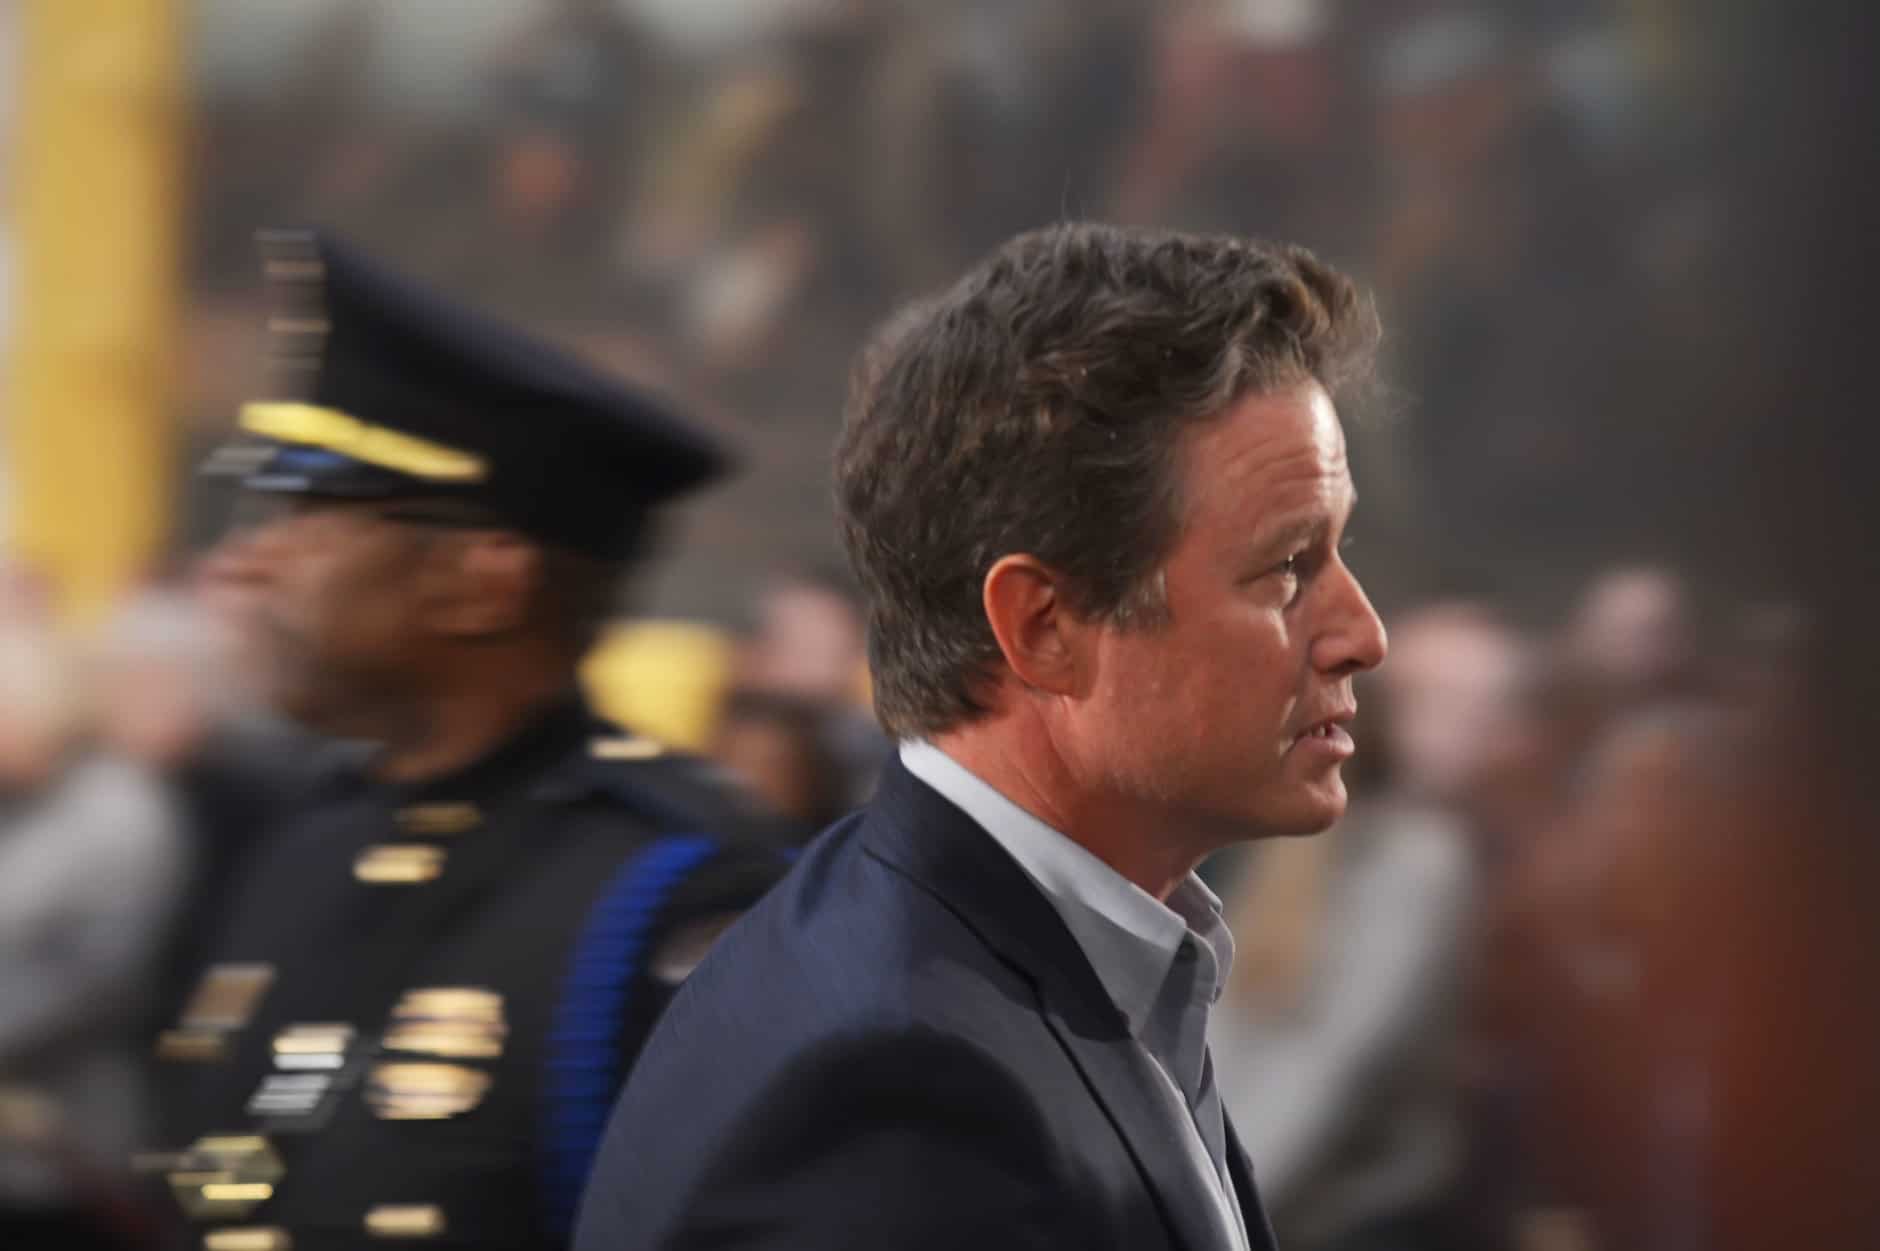 Billy Bush, nephew of the late President George H.W. Bush, attends the lying-in-state on December 4, 2018. (Courtesy Shannon Finney/<a href="https://www.shannonfinneyphotography.com/index" target="_blank" rel="noopener noreferrer">shannonfinneyphotography.com</a>) 